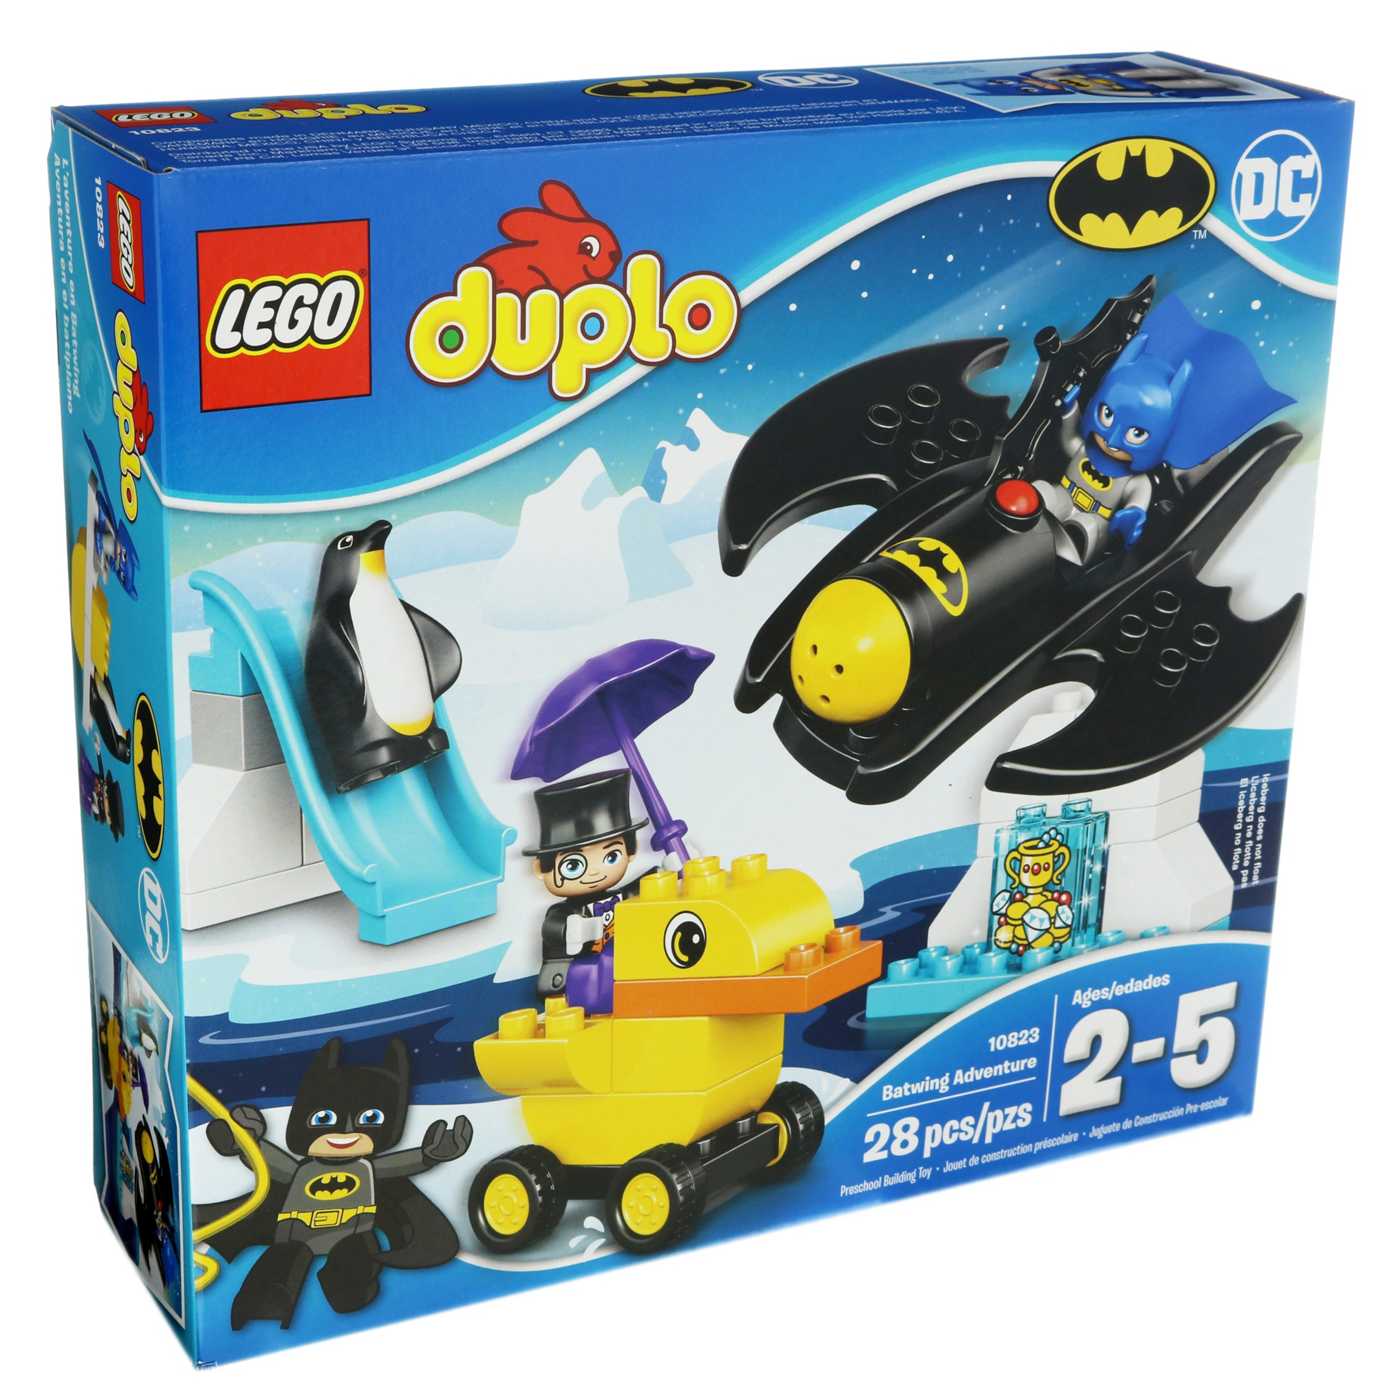 LEGO Heroes Batwing Adventure - Shop Lego & Building at H-E-B